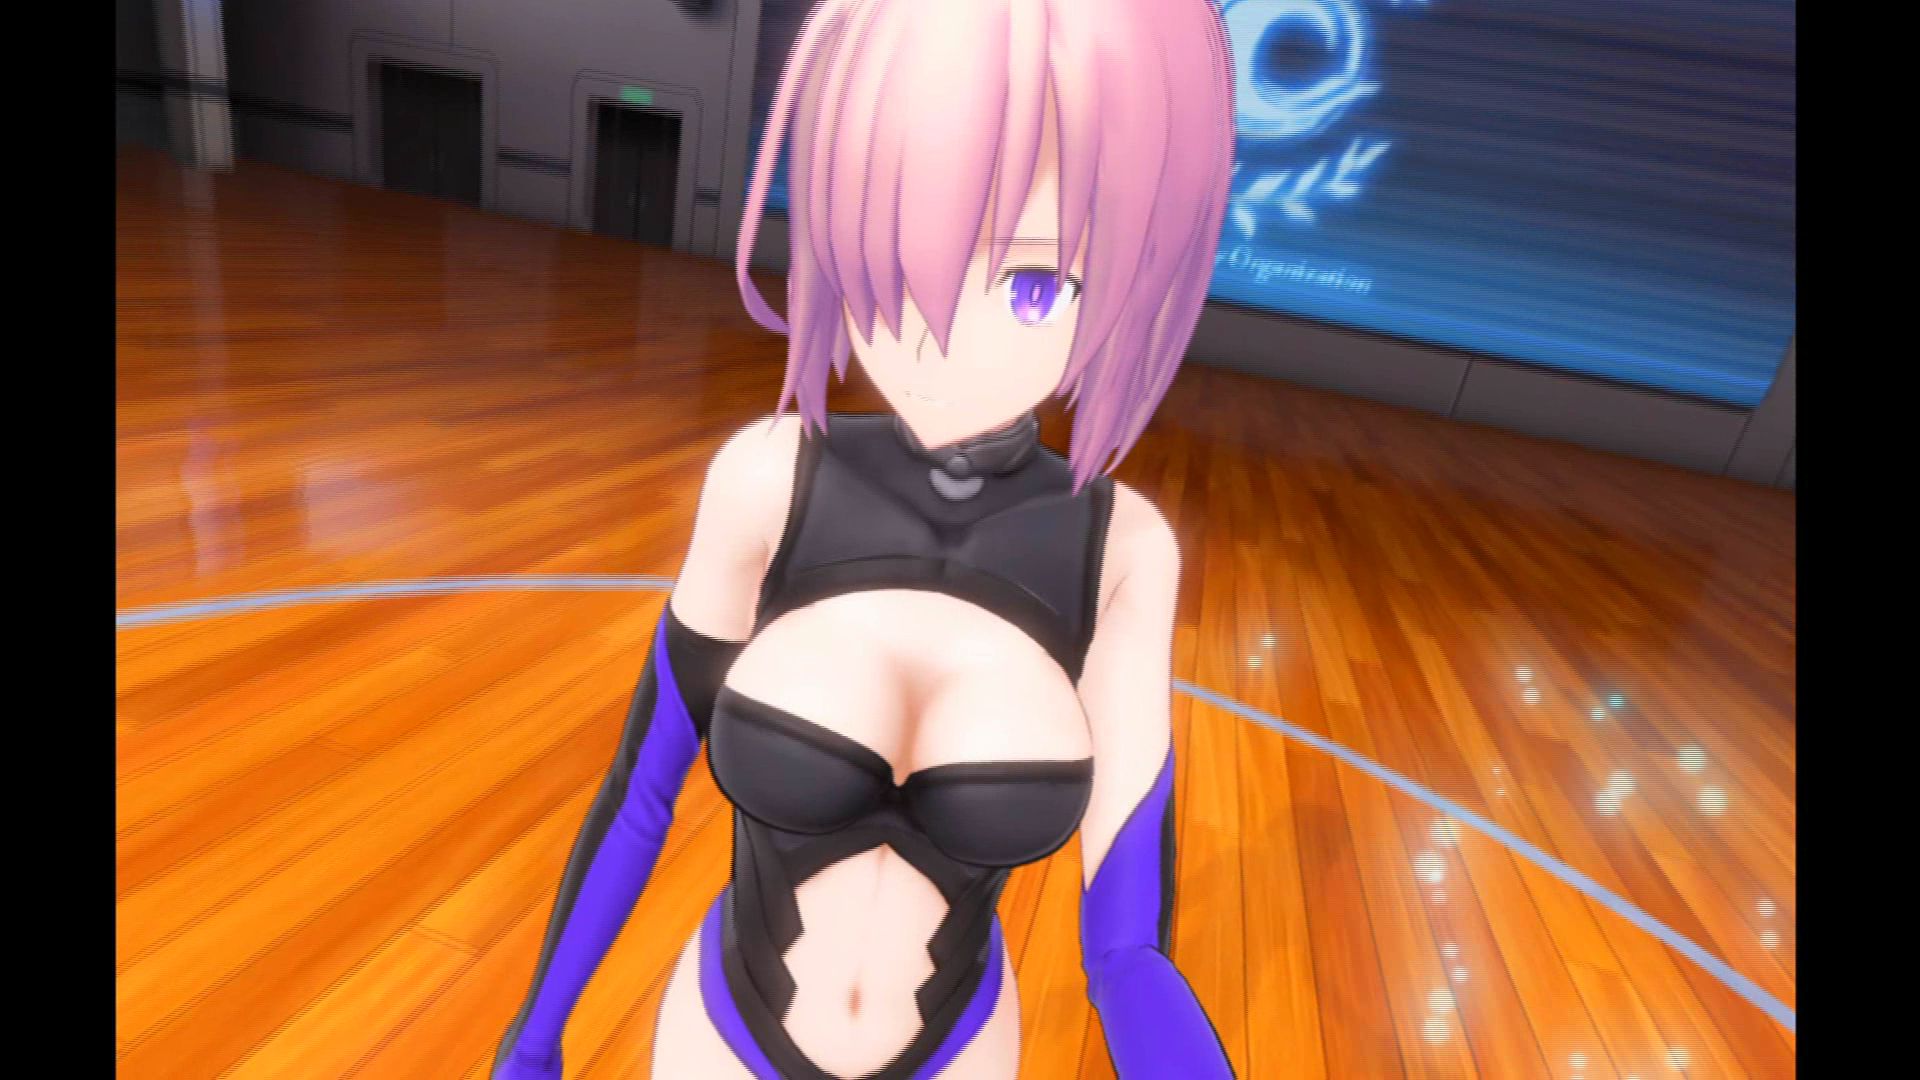 [Fate/Grand order VR] Maschsee underwear and breast! The underwear of the alto rear, too! 13